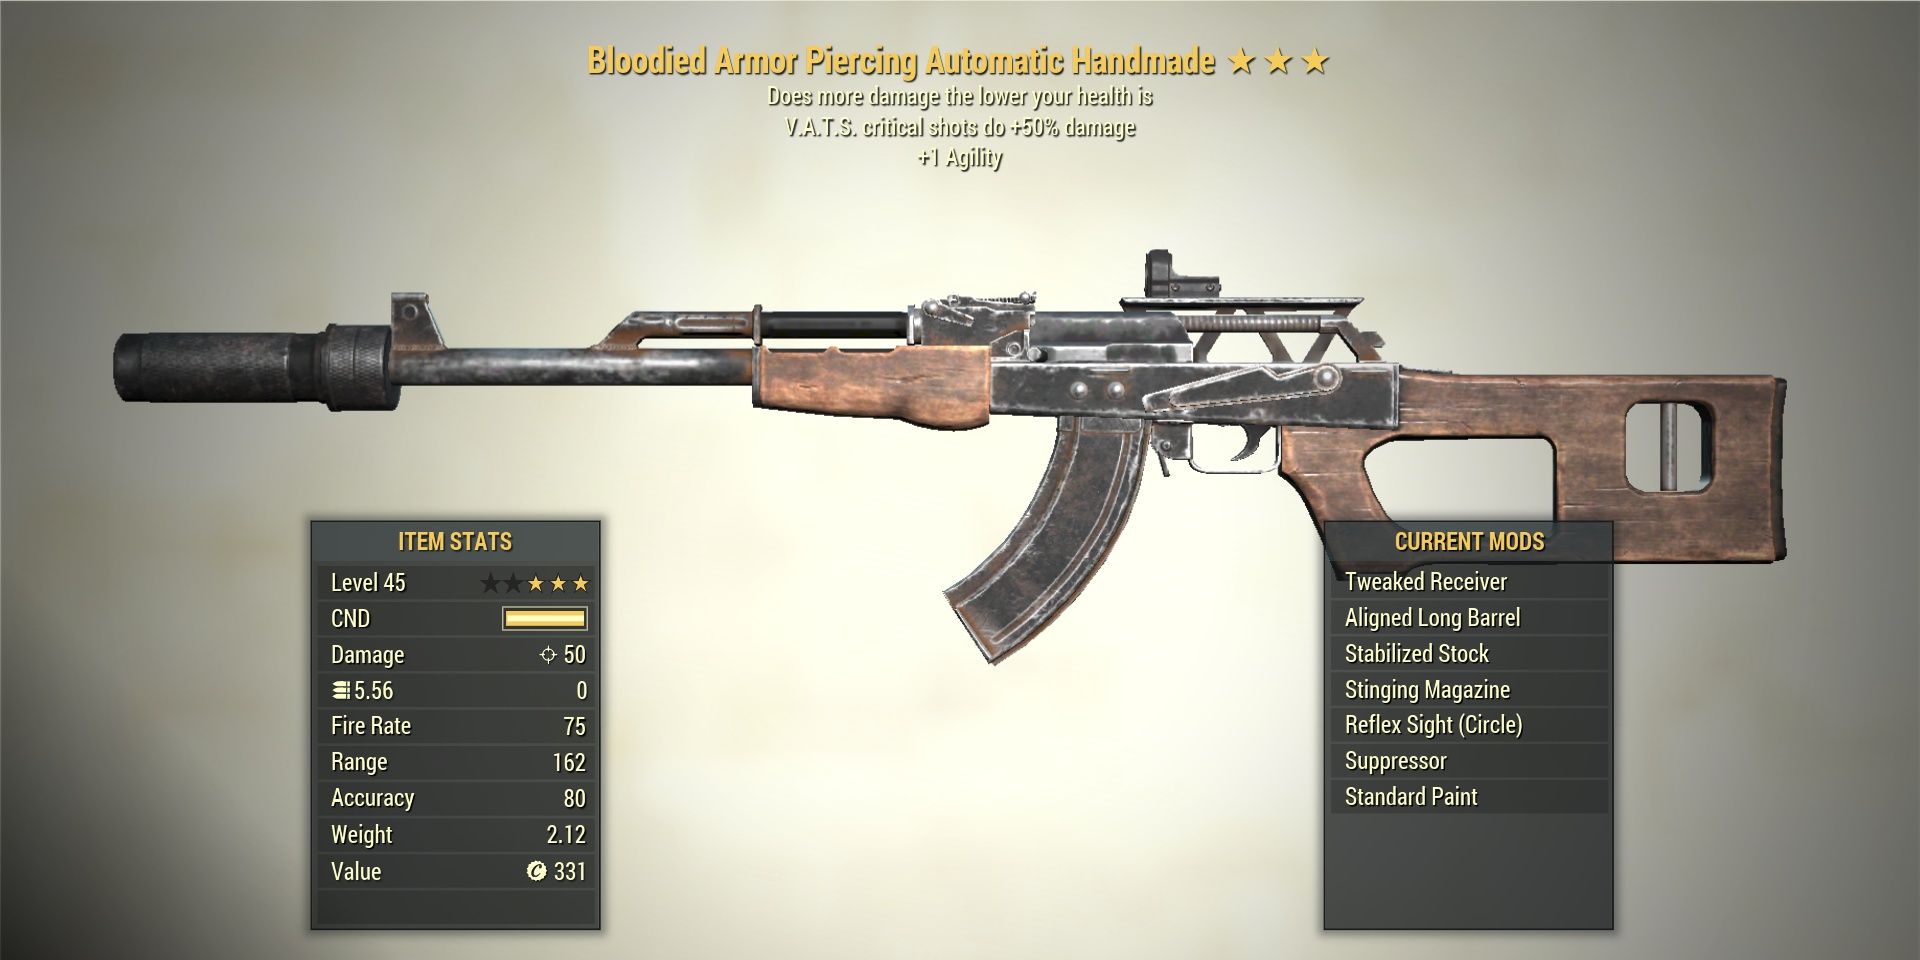 The Handmade Rifle's stats and mod page in Fallout 76